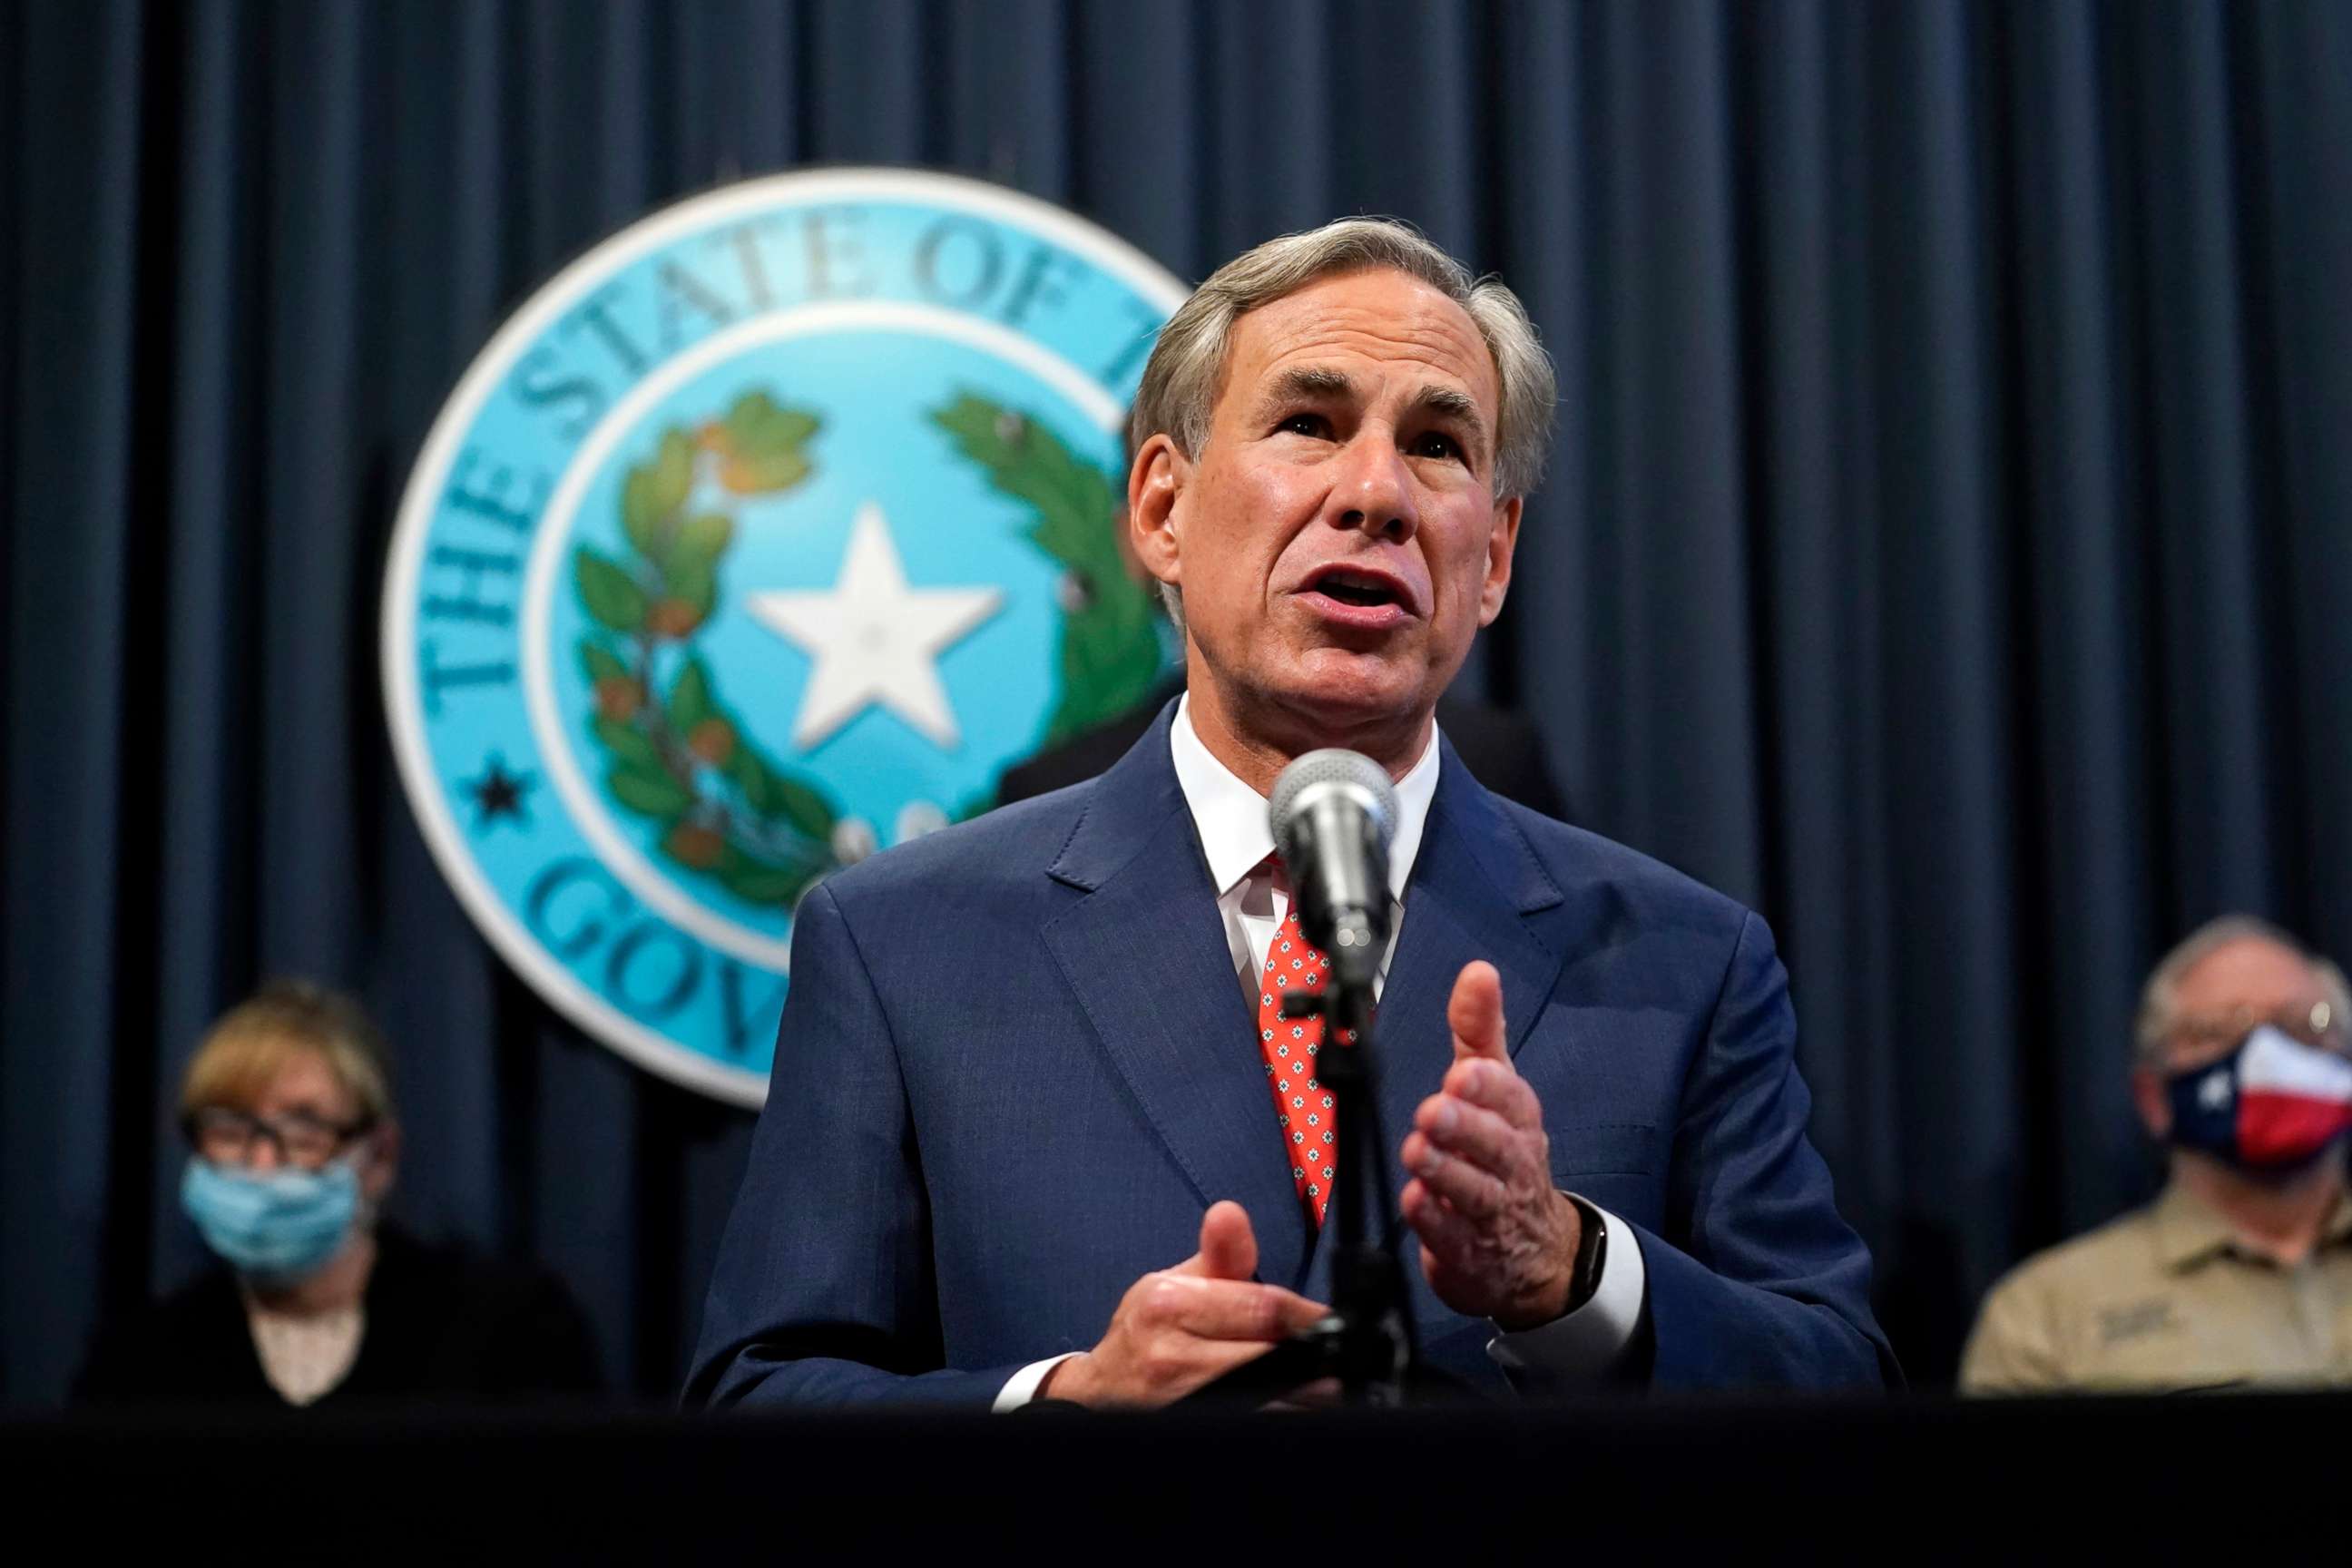 PHOTO: In this Sept. 17, 2020, file photo, Texas Gov. Greg Abbott speaks during a news conference in Austin, Texas.